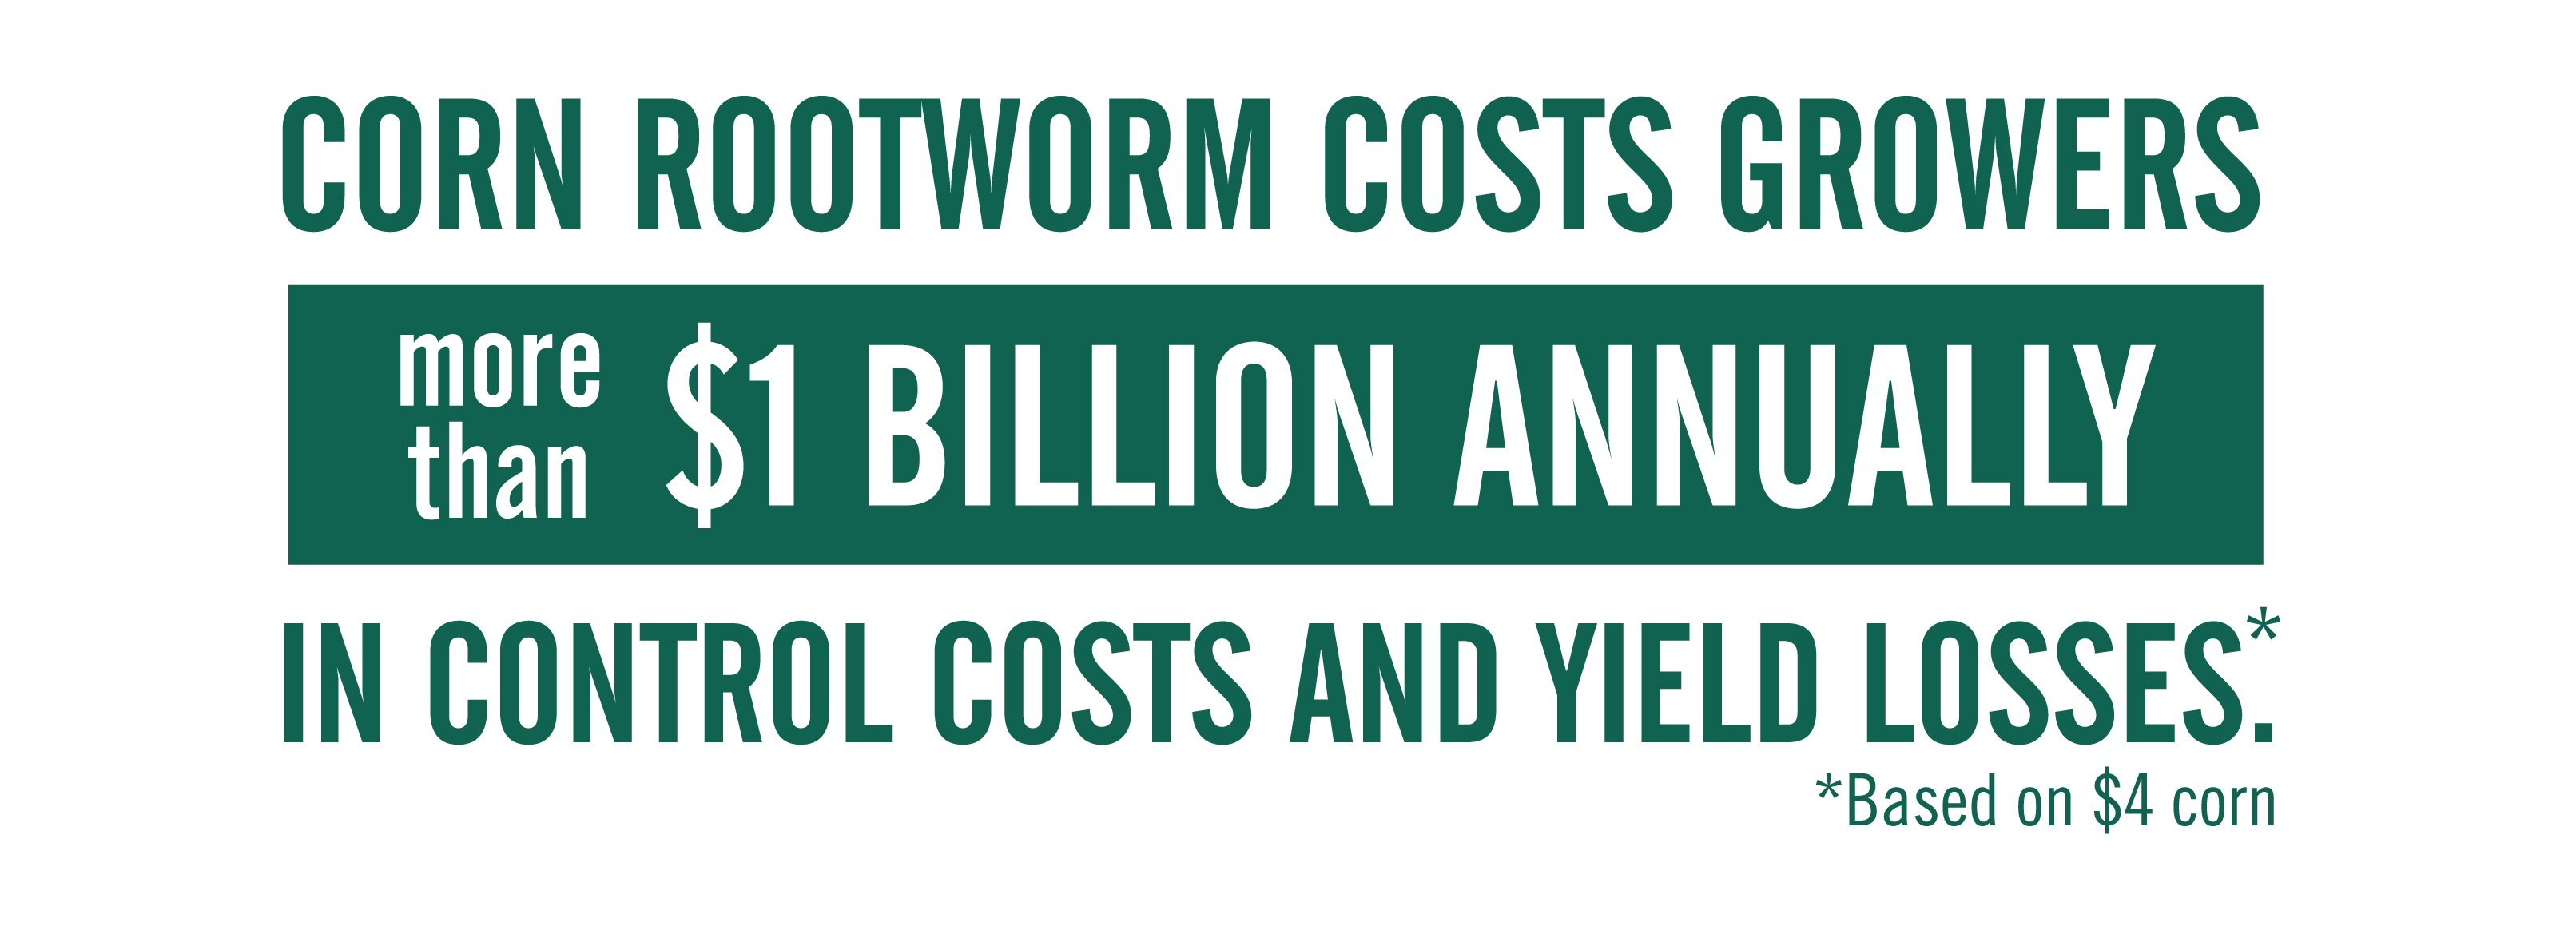 Corn rootworm costs growers more than $1 billion annually in control costs and yield losses*. Based on $4 corn.